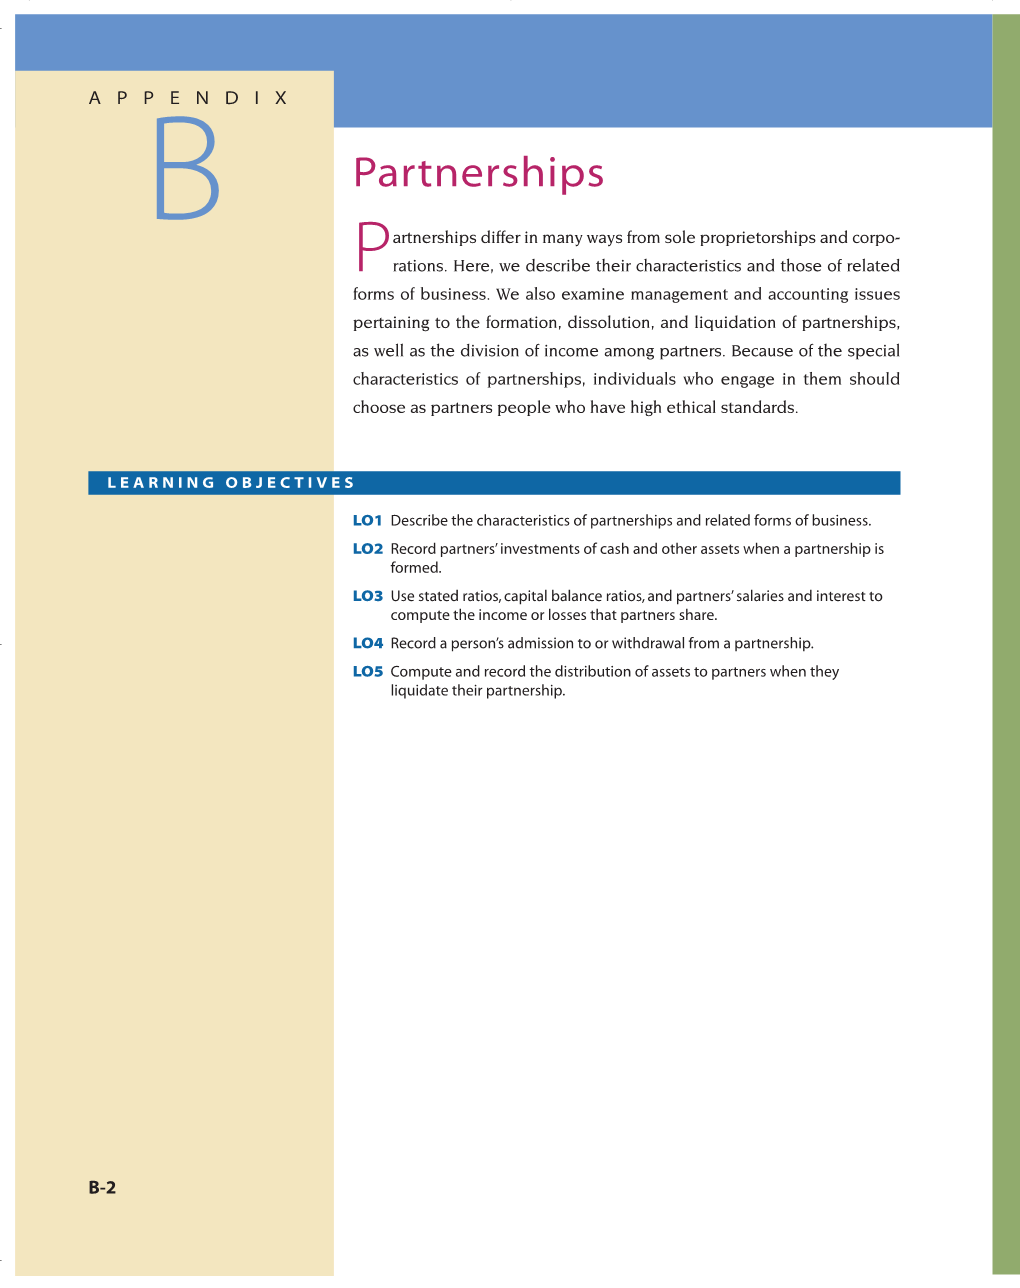 APPENDIX B Partnerships Partnerships and Related Forms of Business